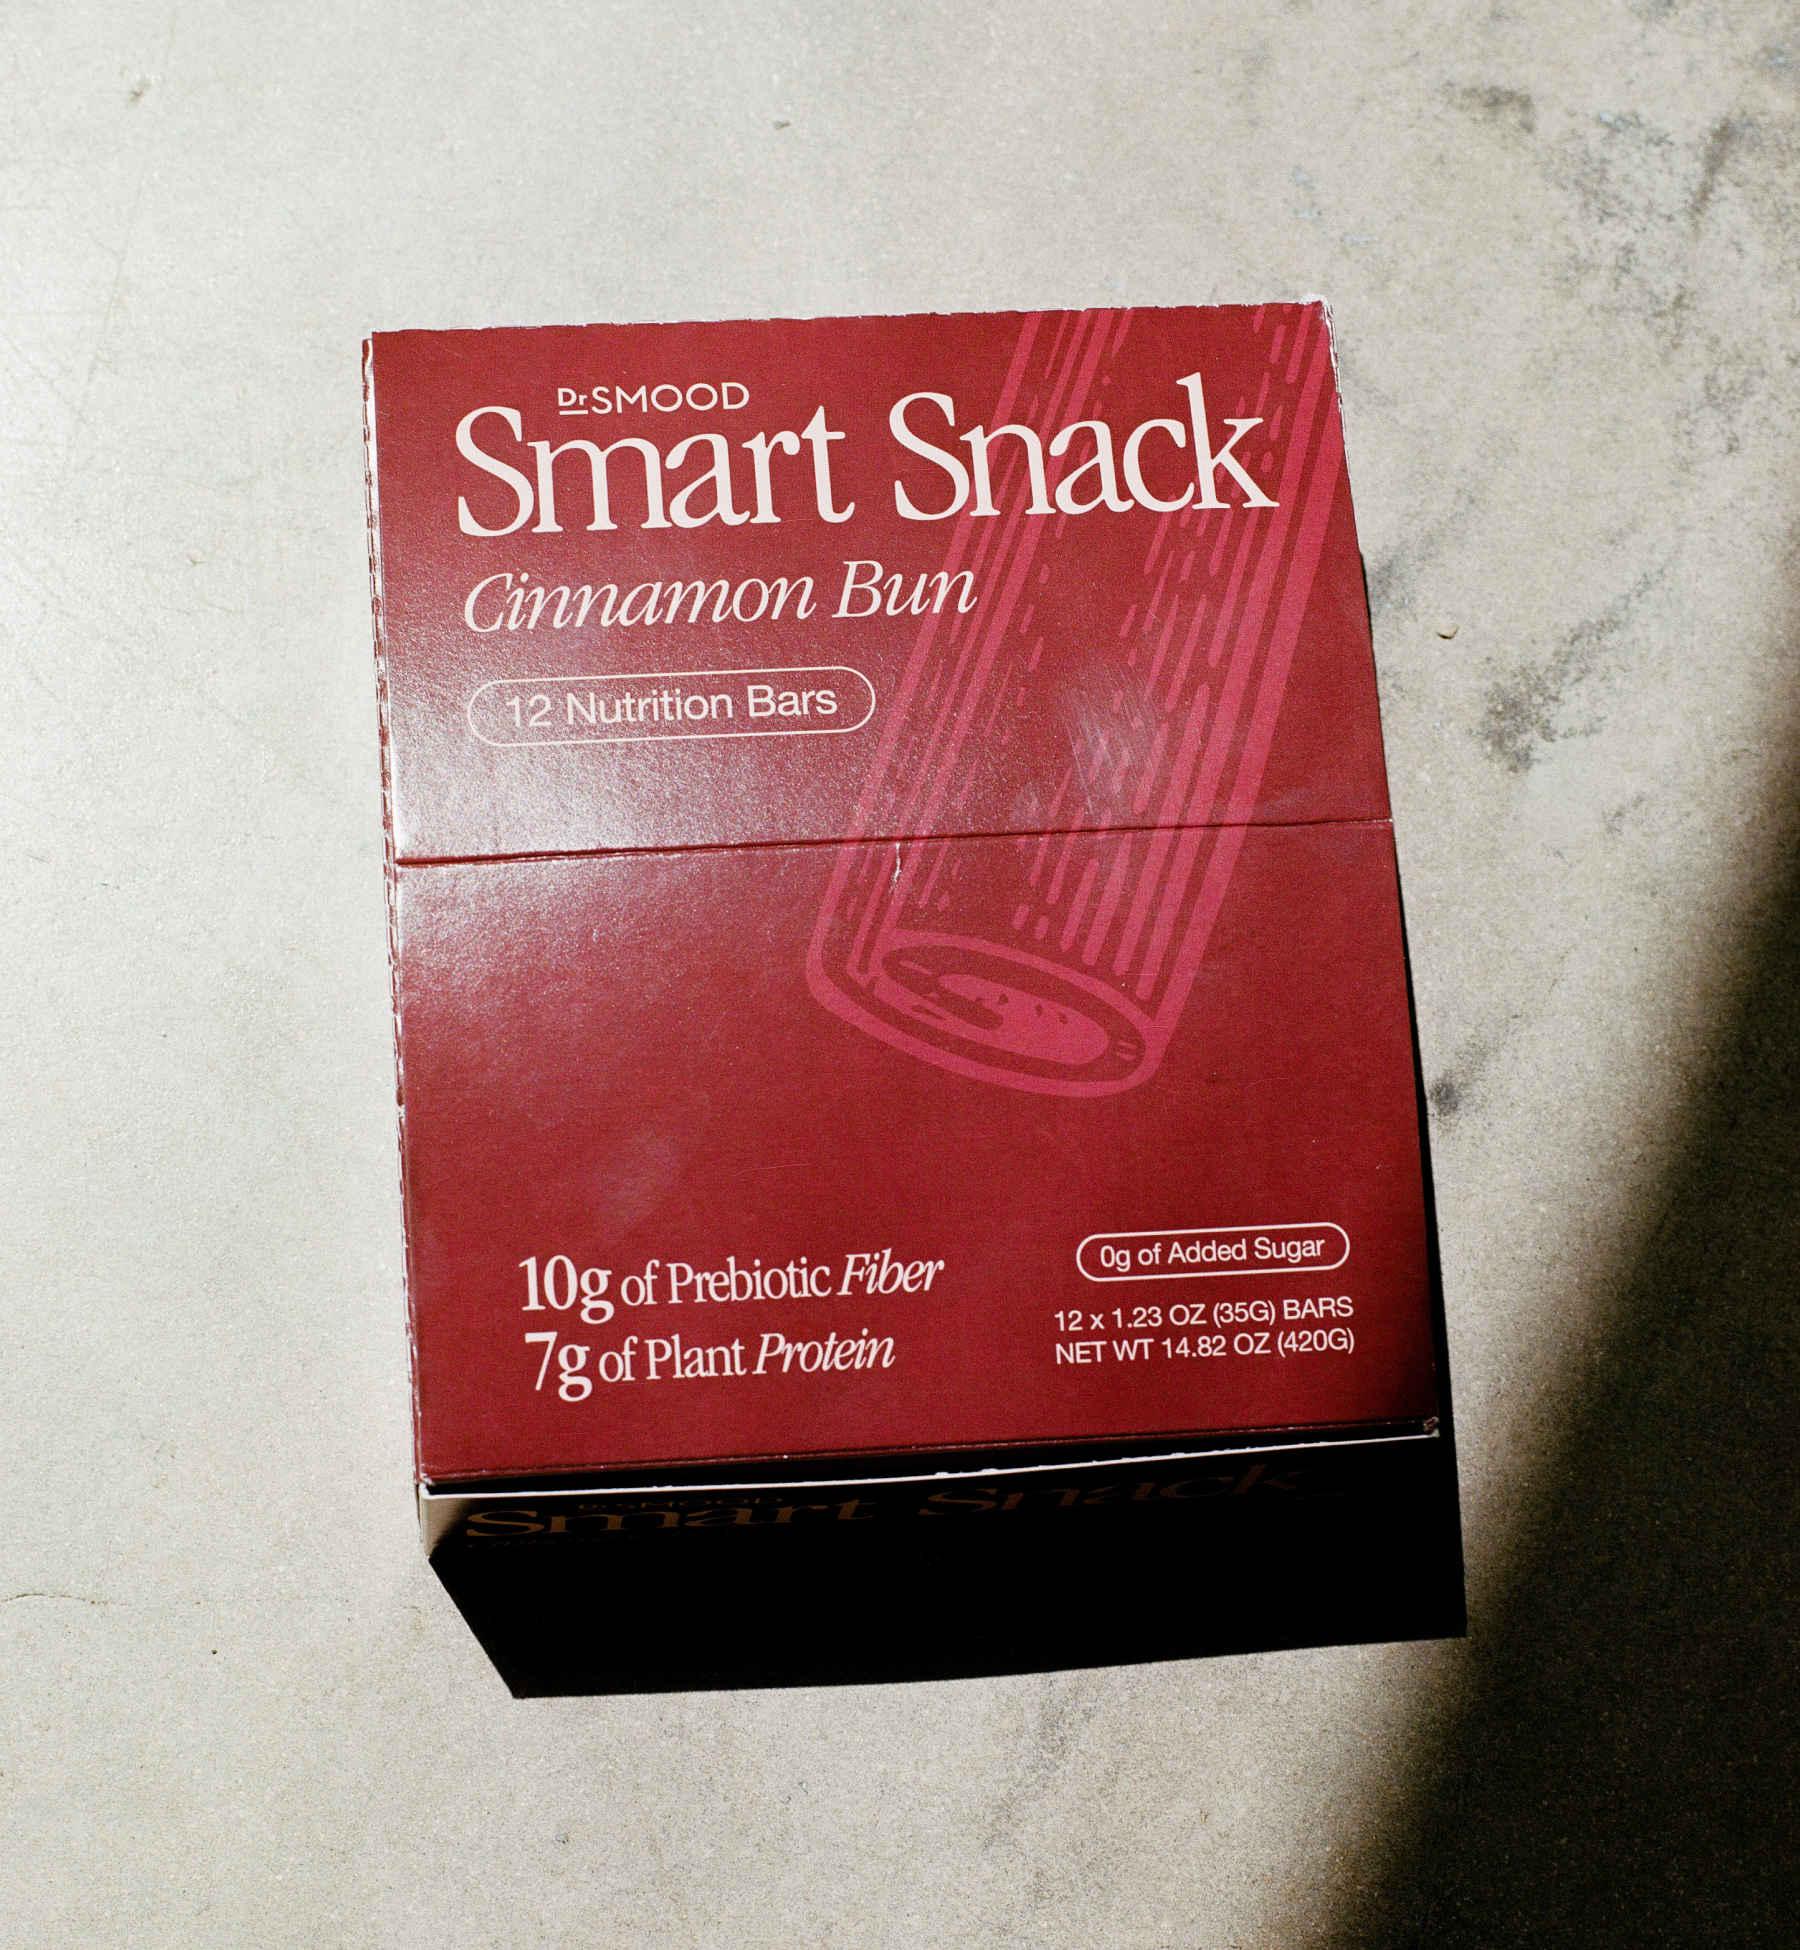 This image shows the Dr. Smood Smart Snack Cinnamon Bun box of nutrition bars placed on a light-colored surface. The box is dark red and prominently features the product name and key nutritional benefits, including “10g of Prebiotic Fiber” and “7g of Plant Protein,” along with “0g of Added Sugar.” The box design also includes an illustration of a cinnamon stick. The light and shadow in the image add a textured look to the surface, creating an interesting visual effect.